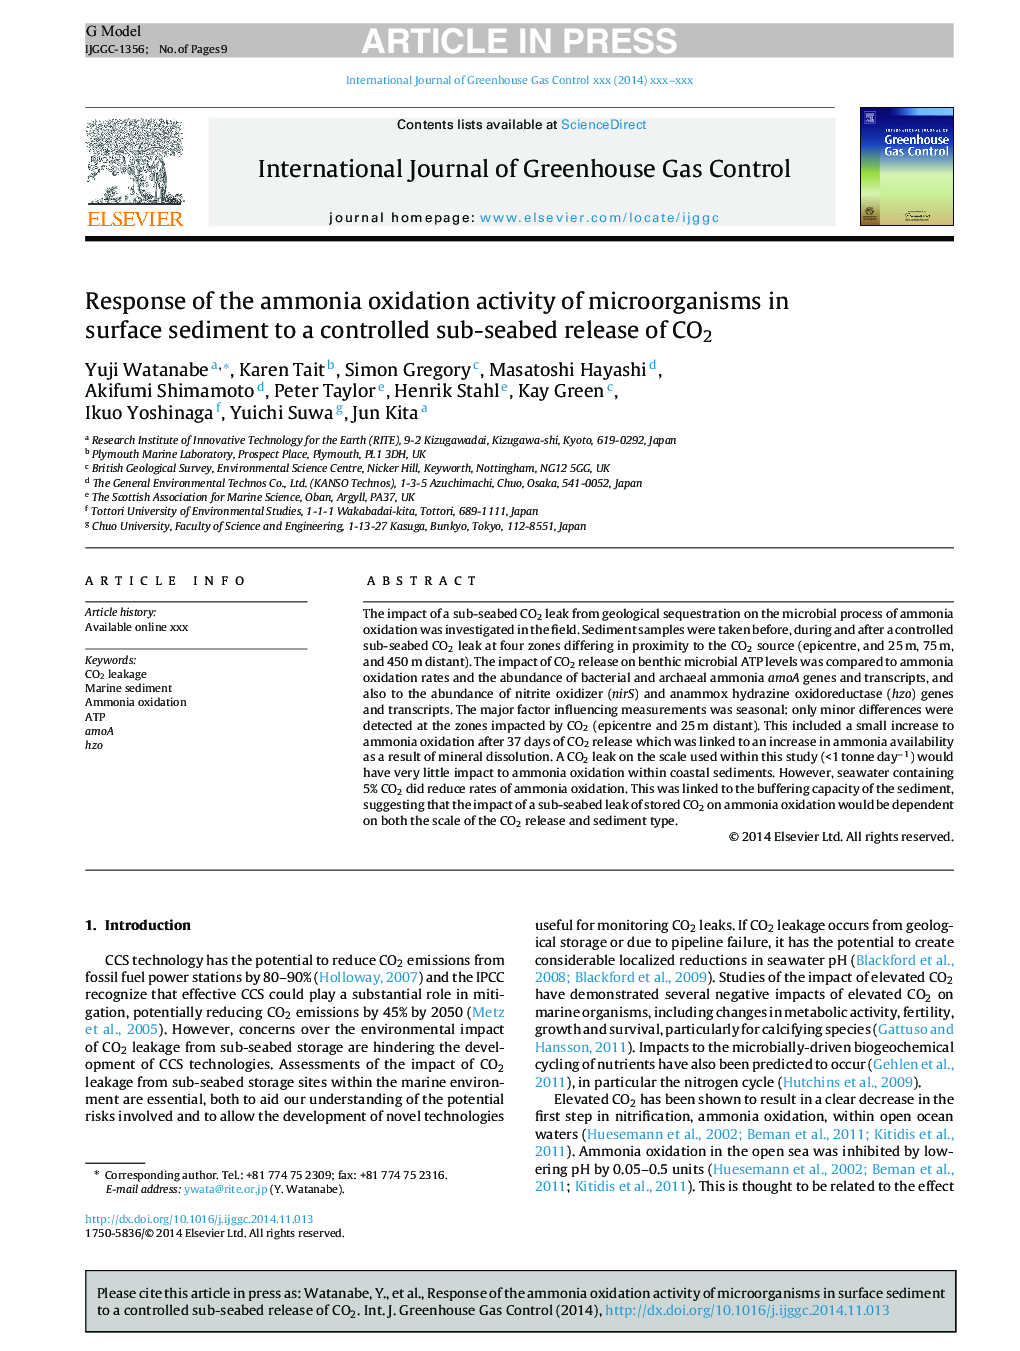 Response of the ammonia oxidation activity of microorganisms in surface sediment to a controlled sub-seabed release of CO2